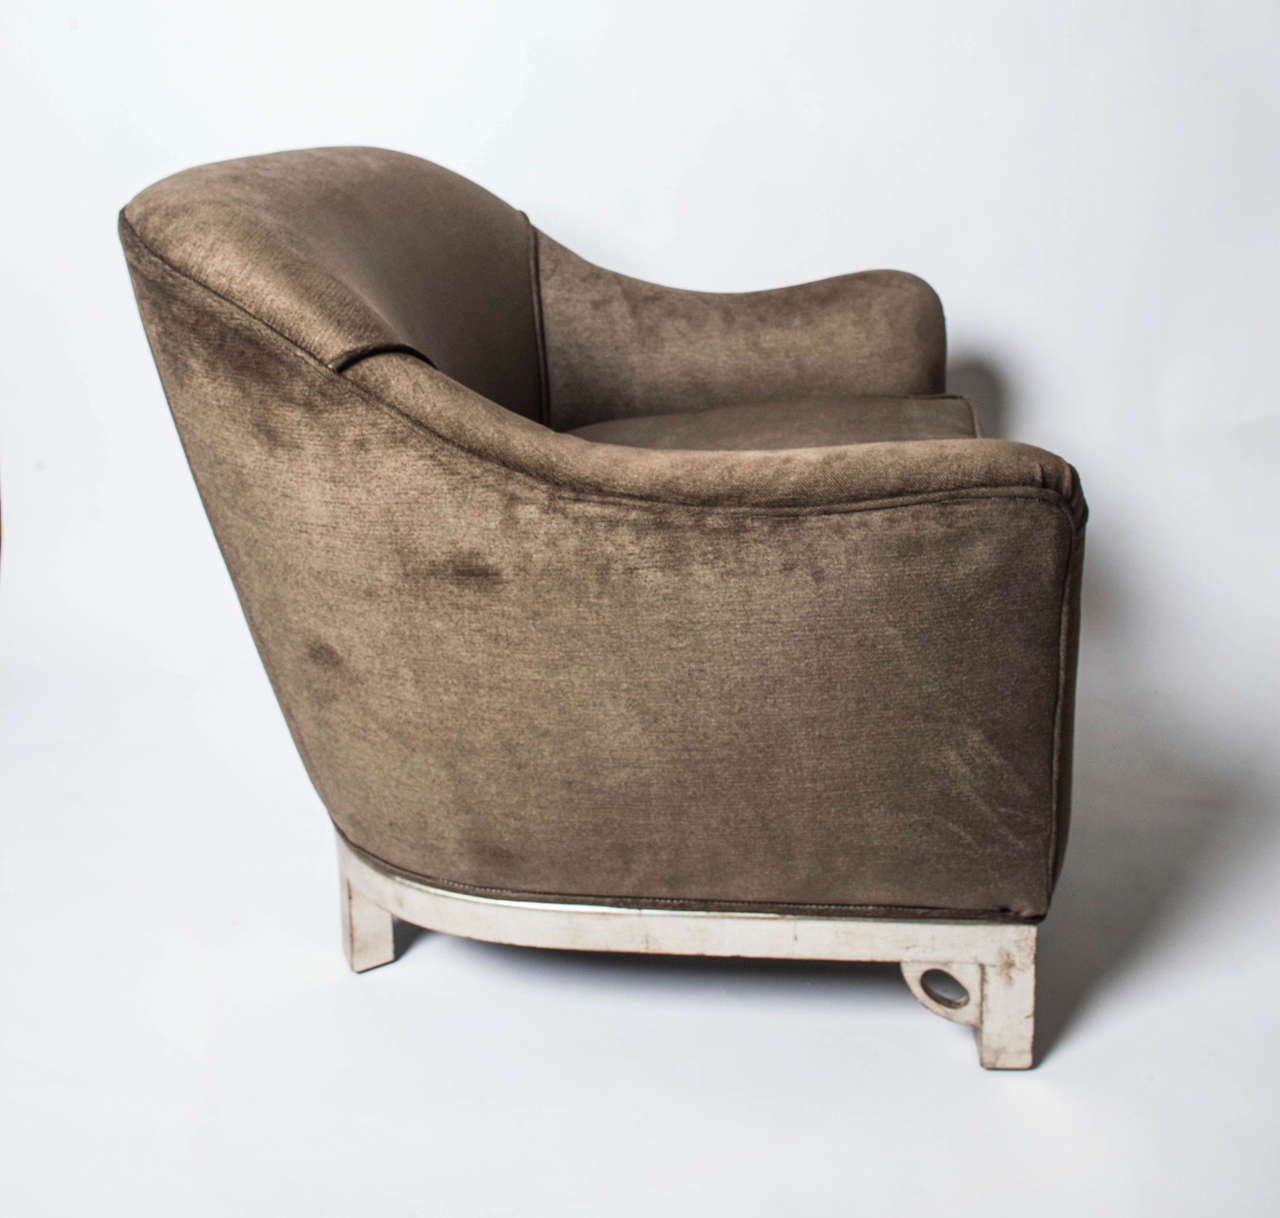 Decorative and comfortable, these luxe James Mont lounge chairs have been re-upholstered in high quality chocolate fabric. We are also happy re-upholster them in the fabric of your choice. 

Great opportunity to own authentic James Mont work!